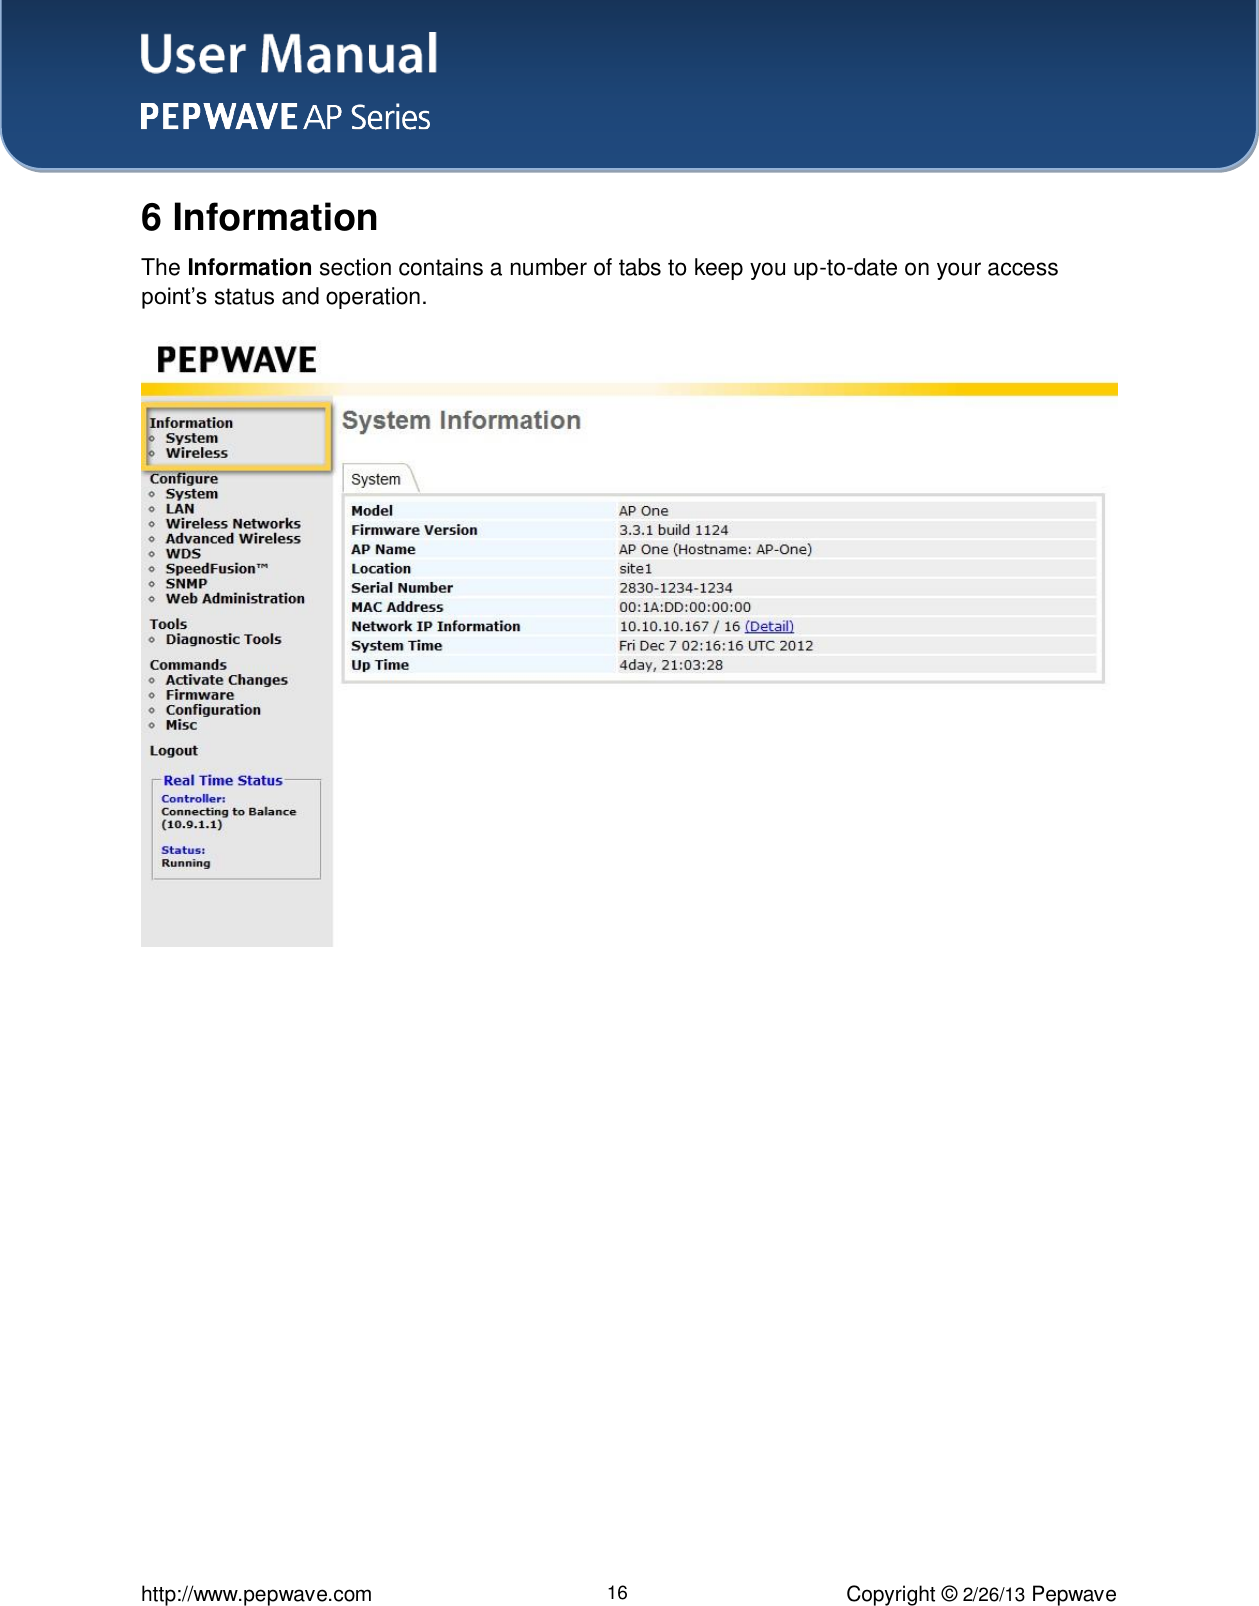 User Manual    http://www.pepwave.com 16 Copyright © 2/26/13 Pepwave  6 Information The Information section contains a number of tabs to keep you up-to-date on your access point’s status and operation.  